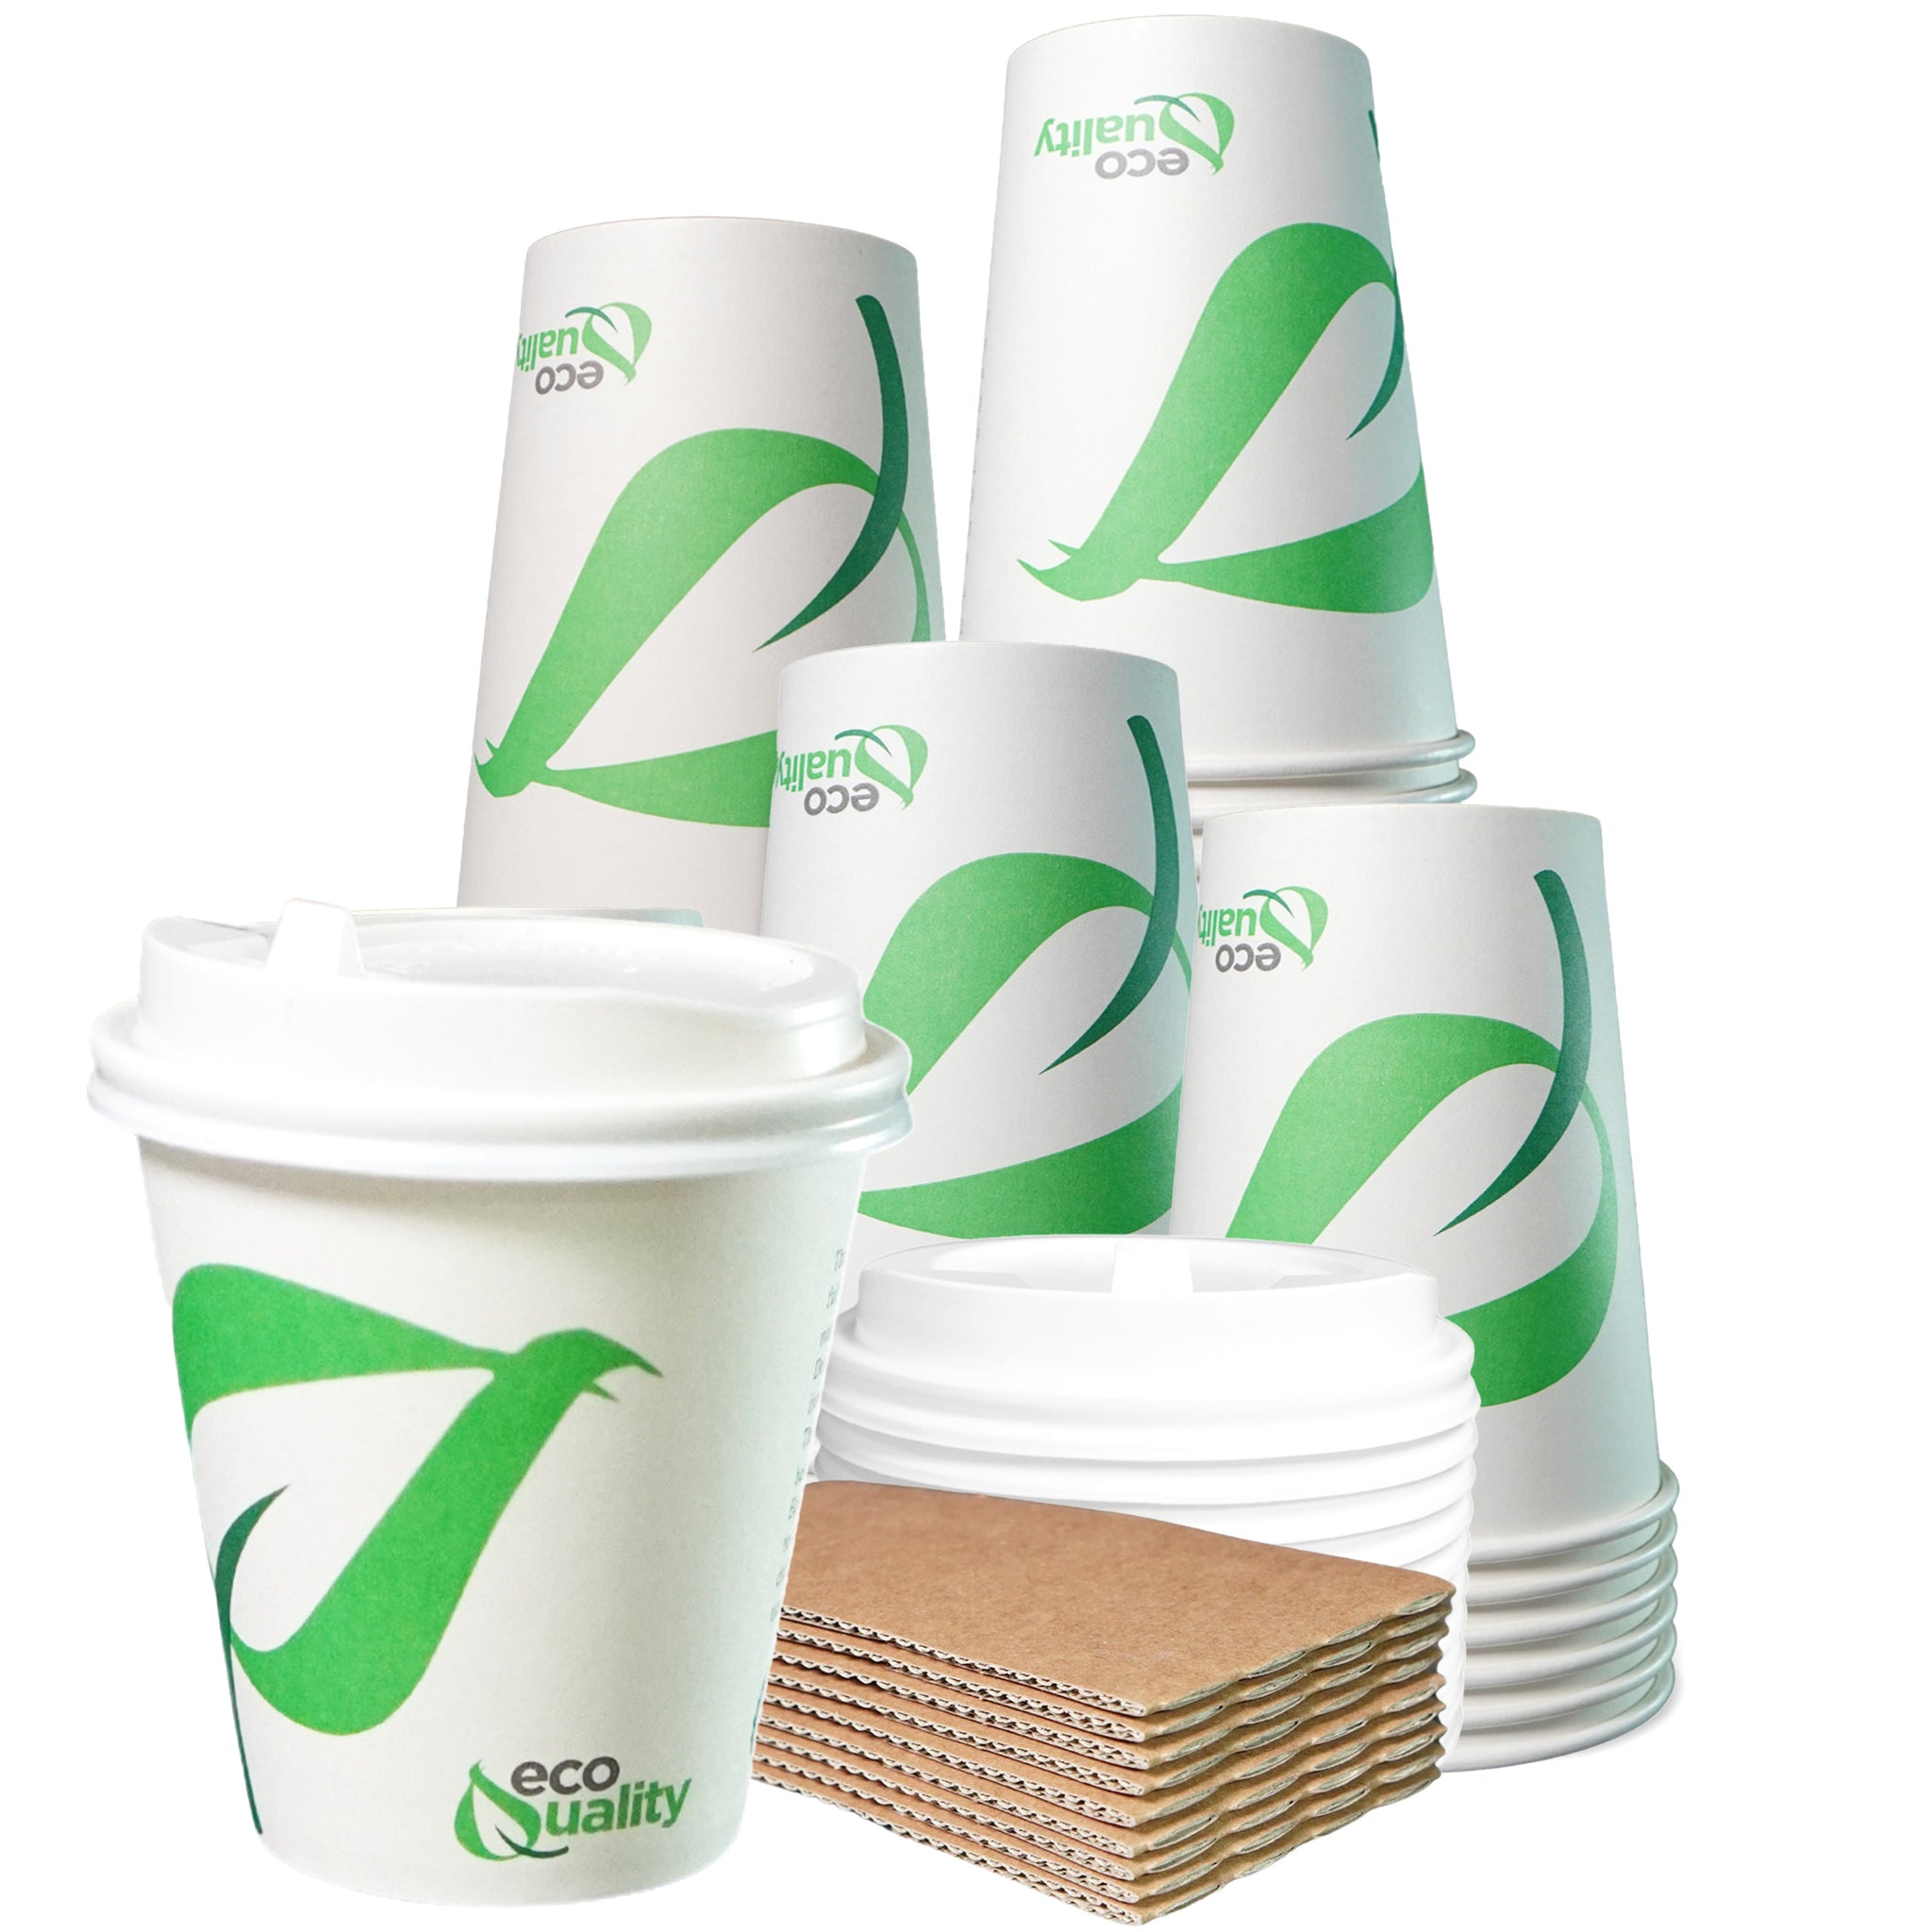 10oz Disposable Compostable Biodegradable White Paper Coffee Cups with White Dome Lids and Sleeves